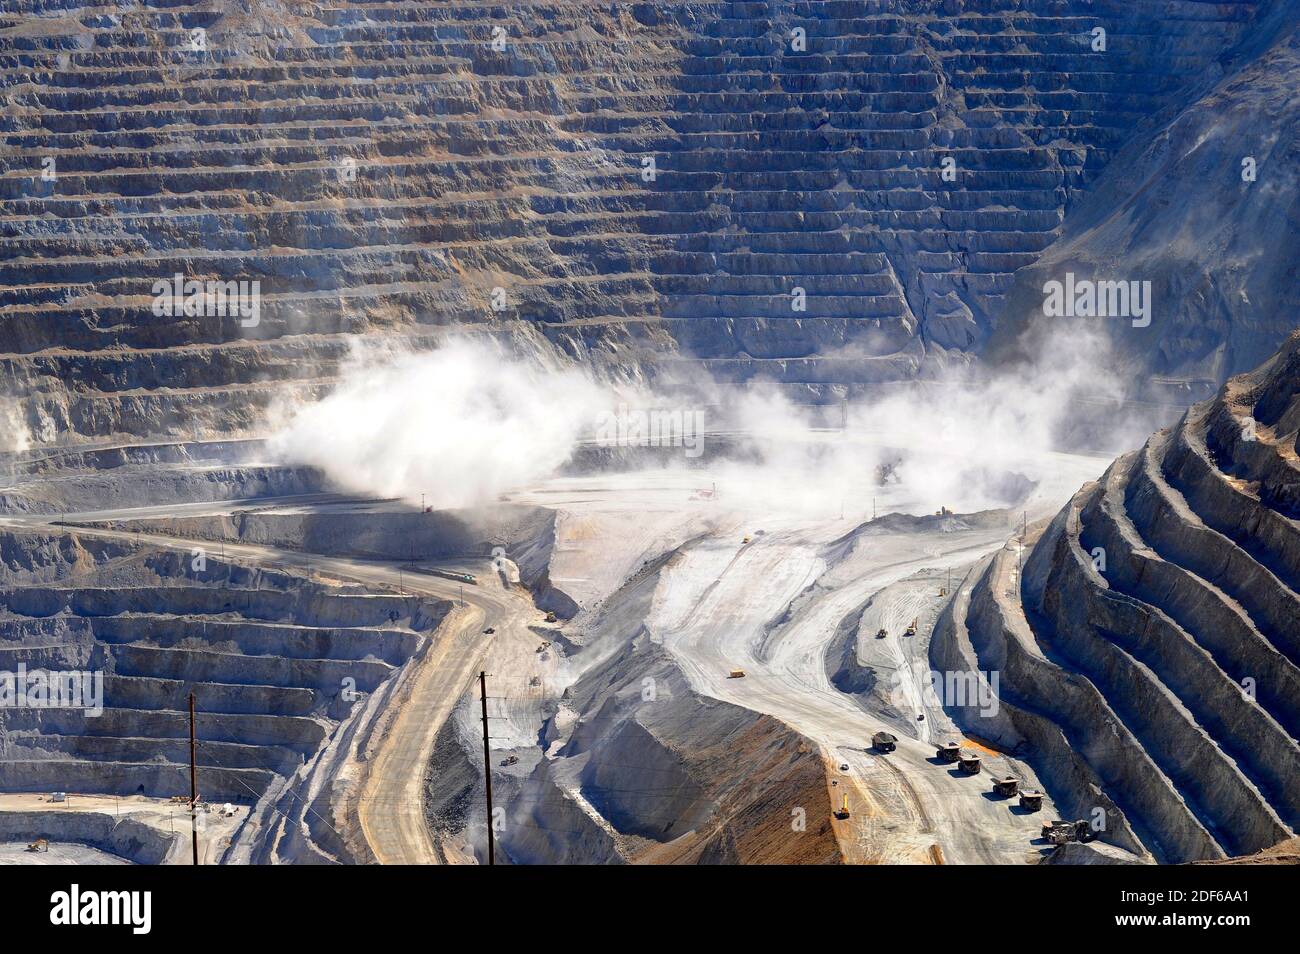 Bingham Canyon Mine at the time of the controlled explosion. Bingham Canyon known as Kennecott Mine is a open-pit copper mine. Oquirrh Mountains, Stock Photo